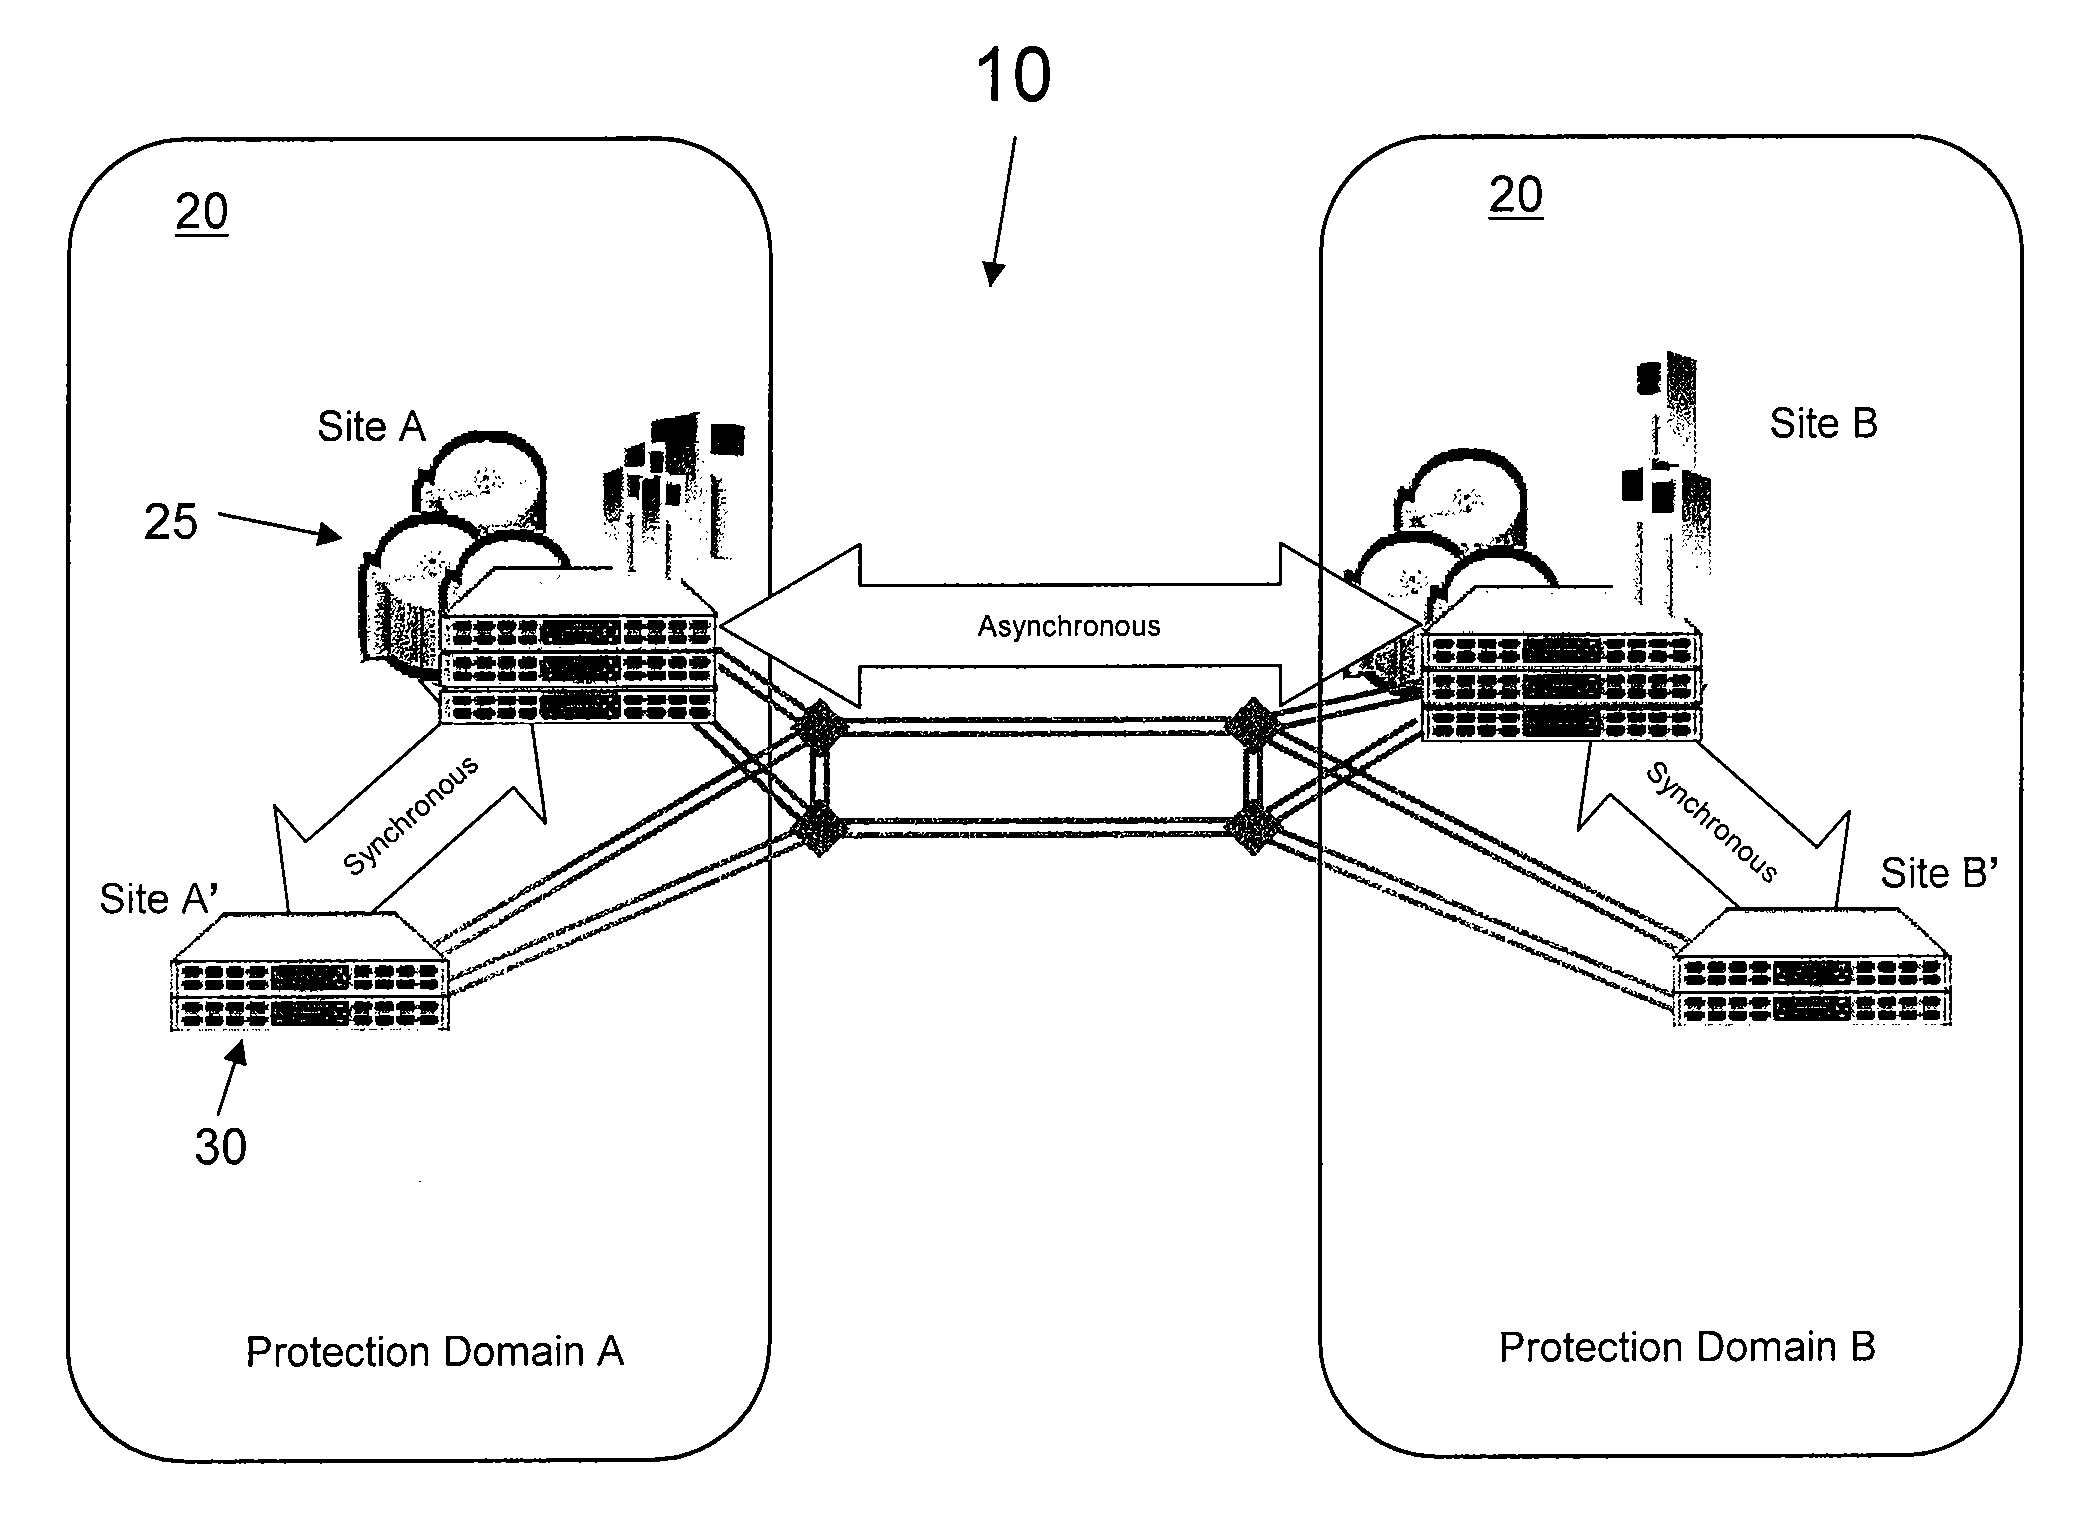 Systems and methods for obtaining ultra-high data availability and geographic disaster tolerance